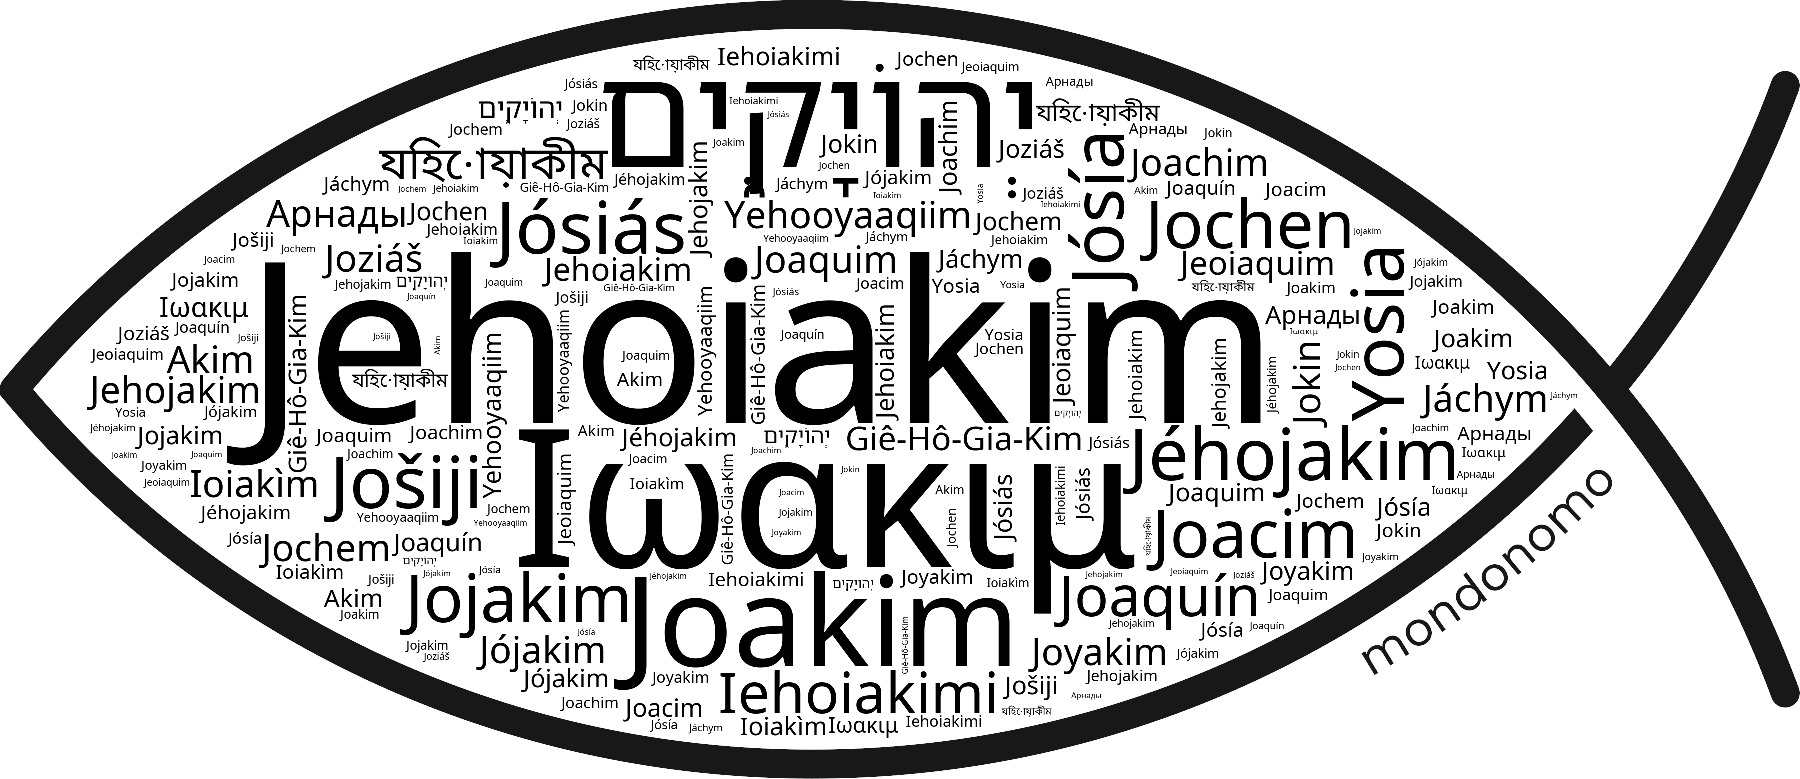 Name Jehoiakim in the world's Bibles